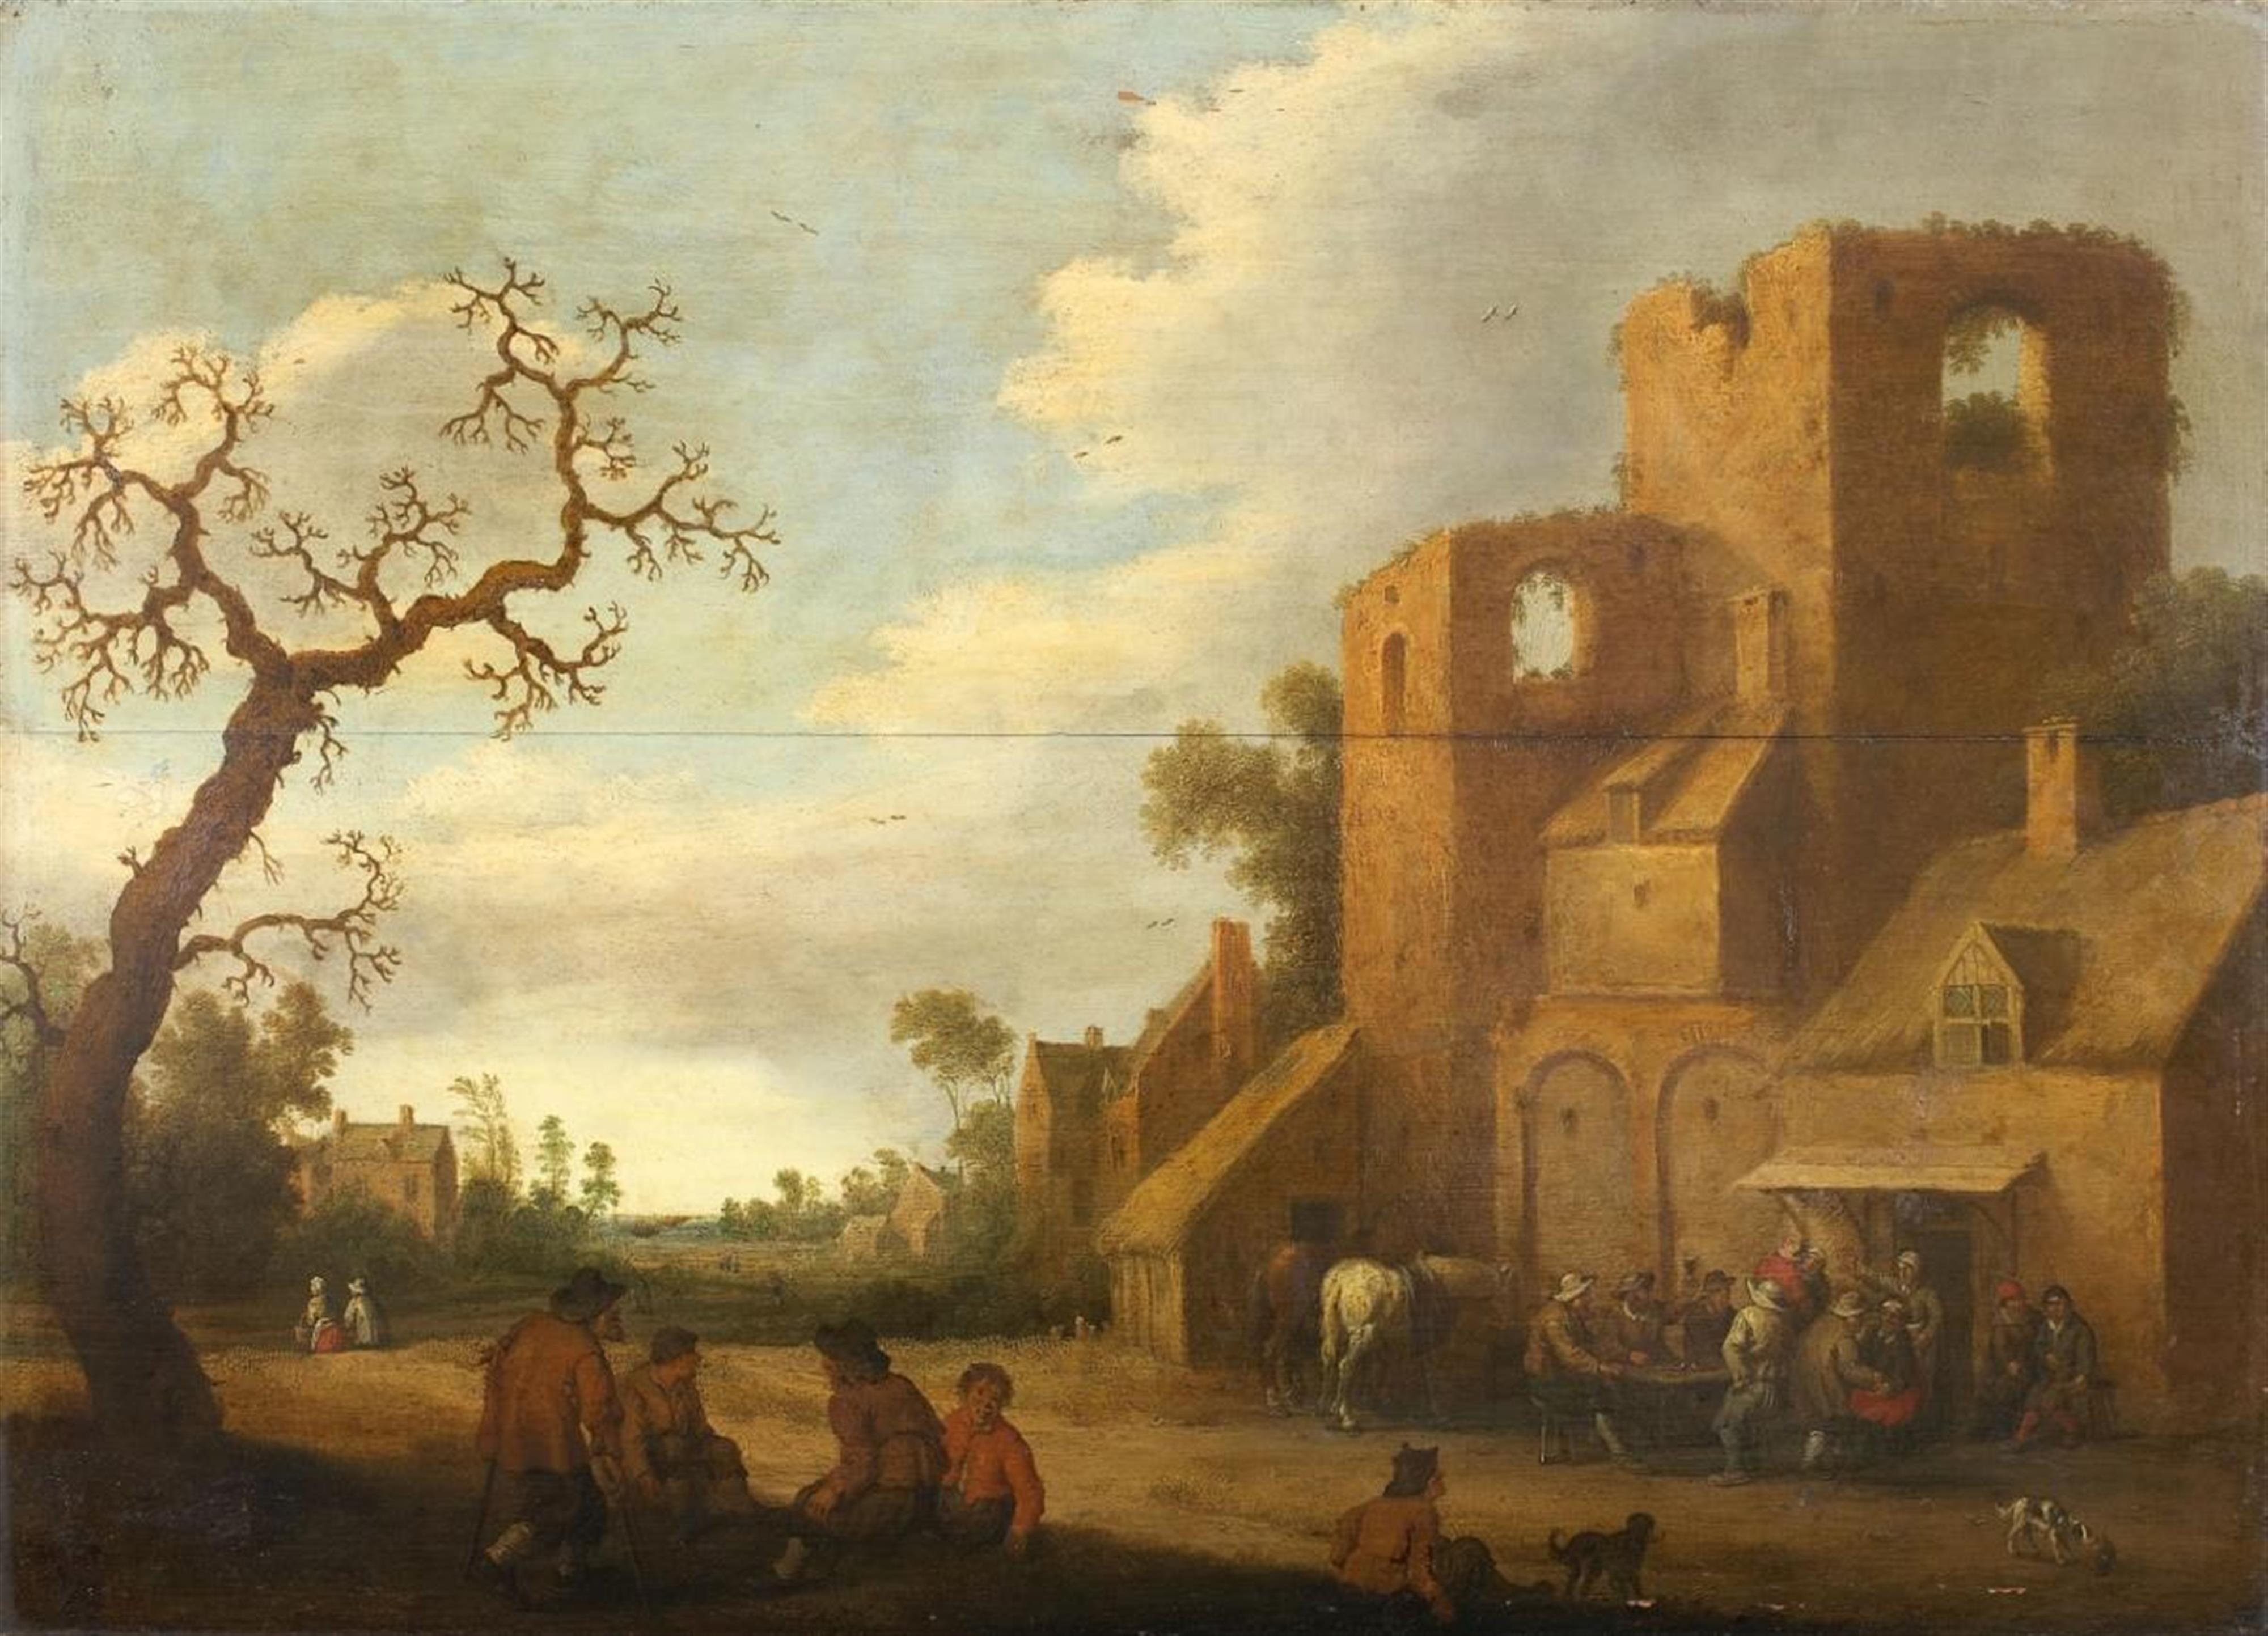 Netherlandish School, second half 17th century - PEASANTS IN FRONT OF A TAVERN - image-1